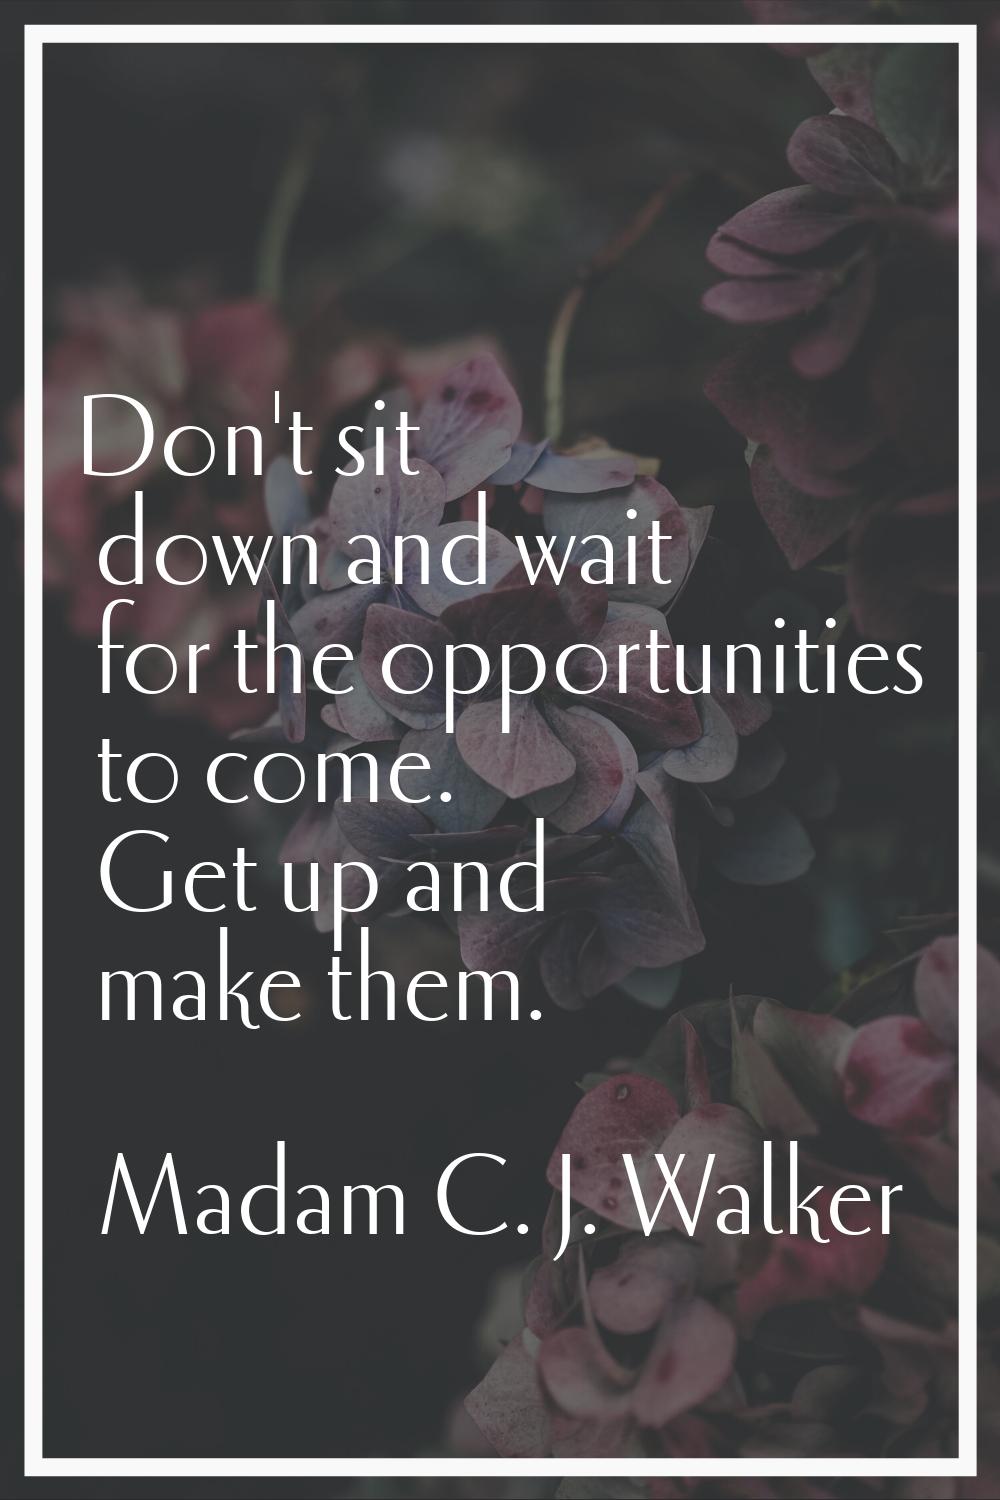 Don't sit down and wait for the opportunities to come. Get up and make them.